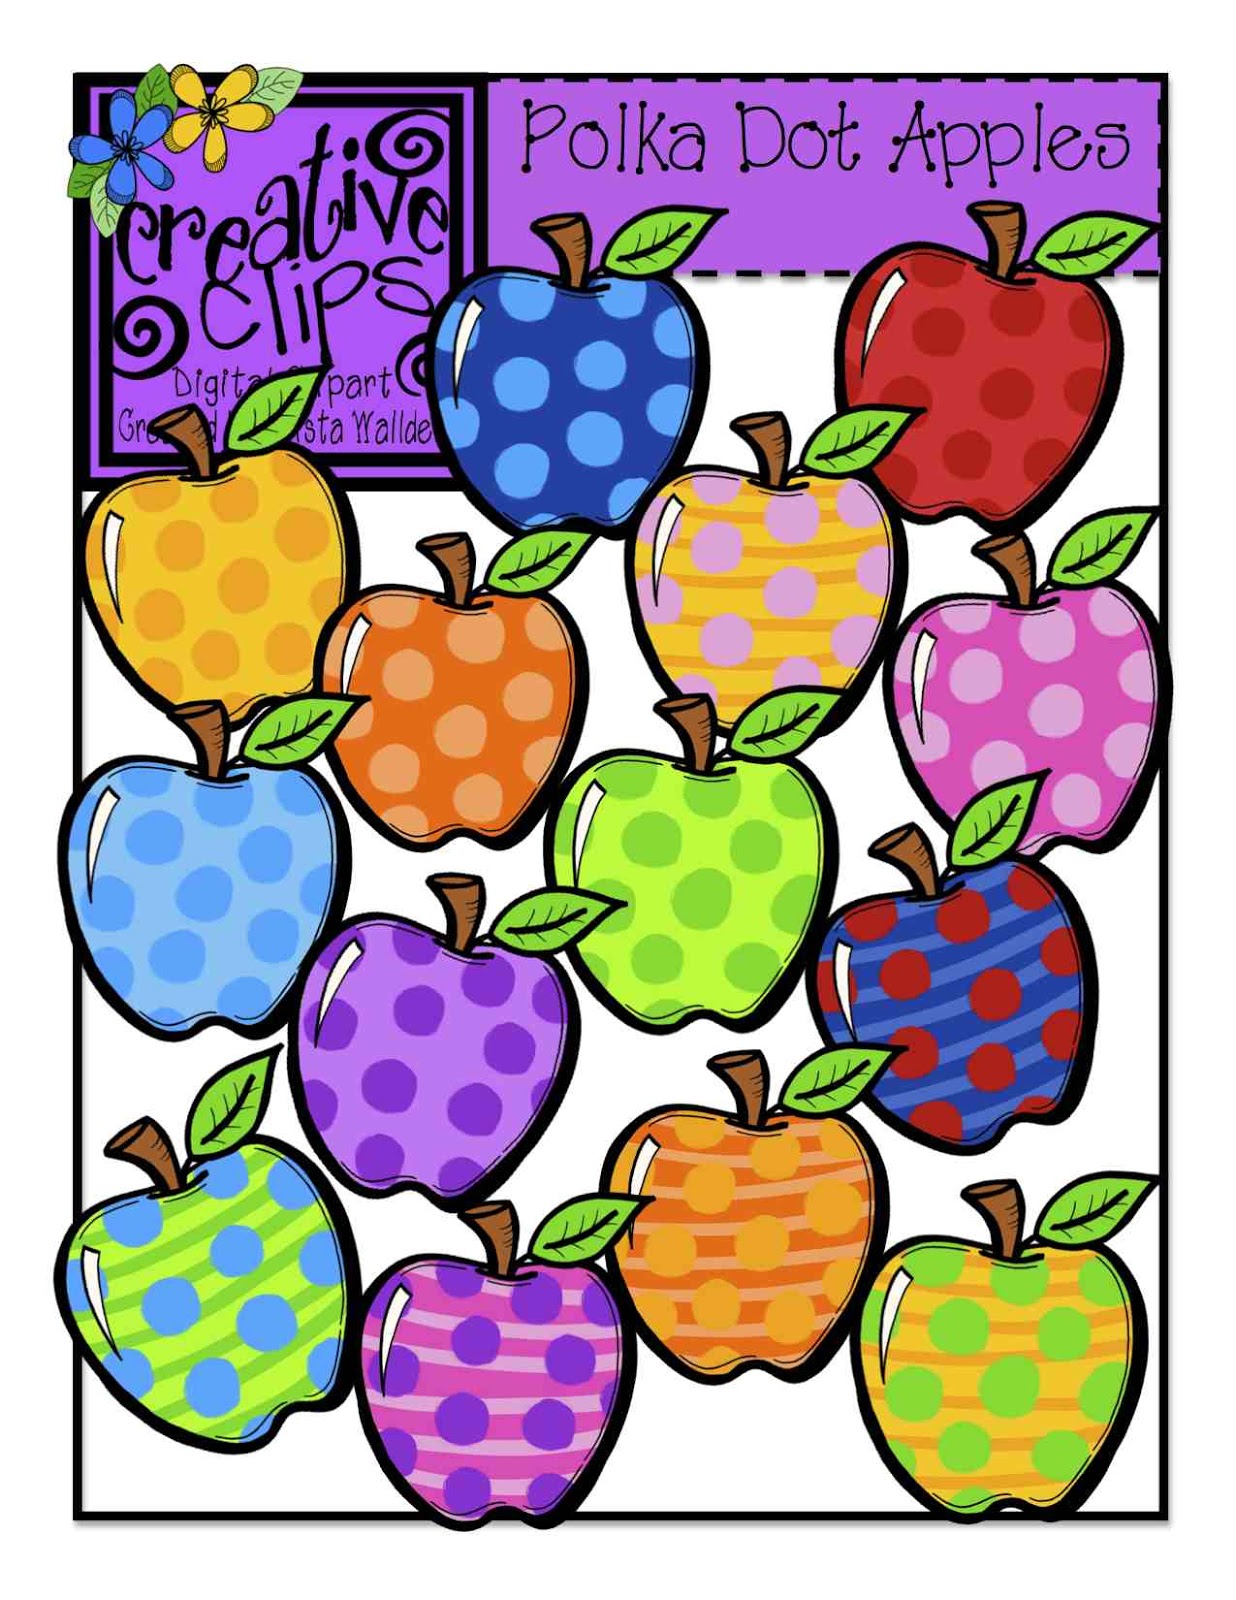 Creative Chalkboard  Free Rainbow Apples And New Clipart Sets Galore